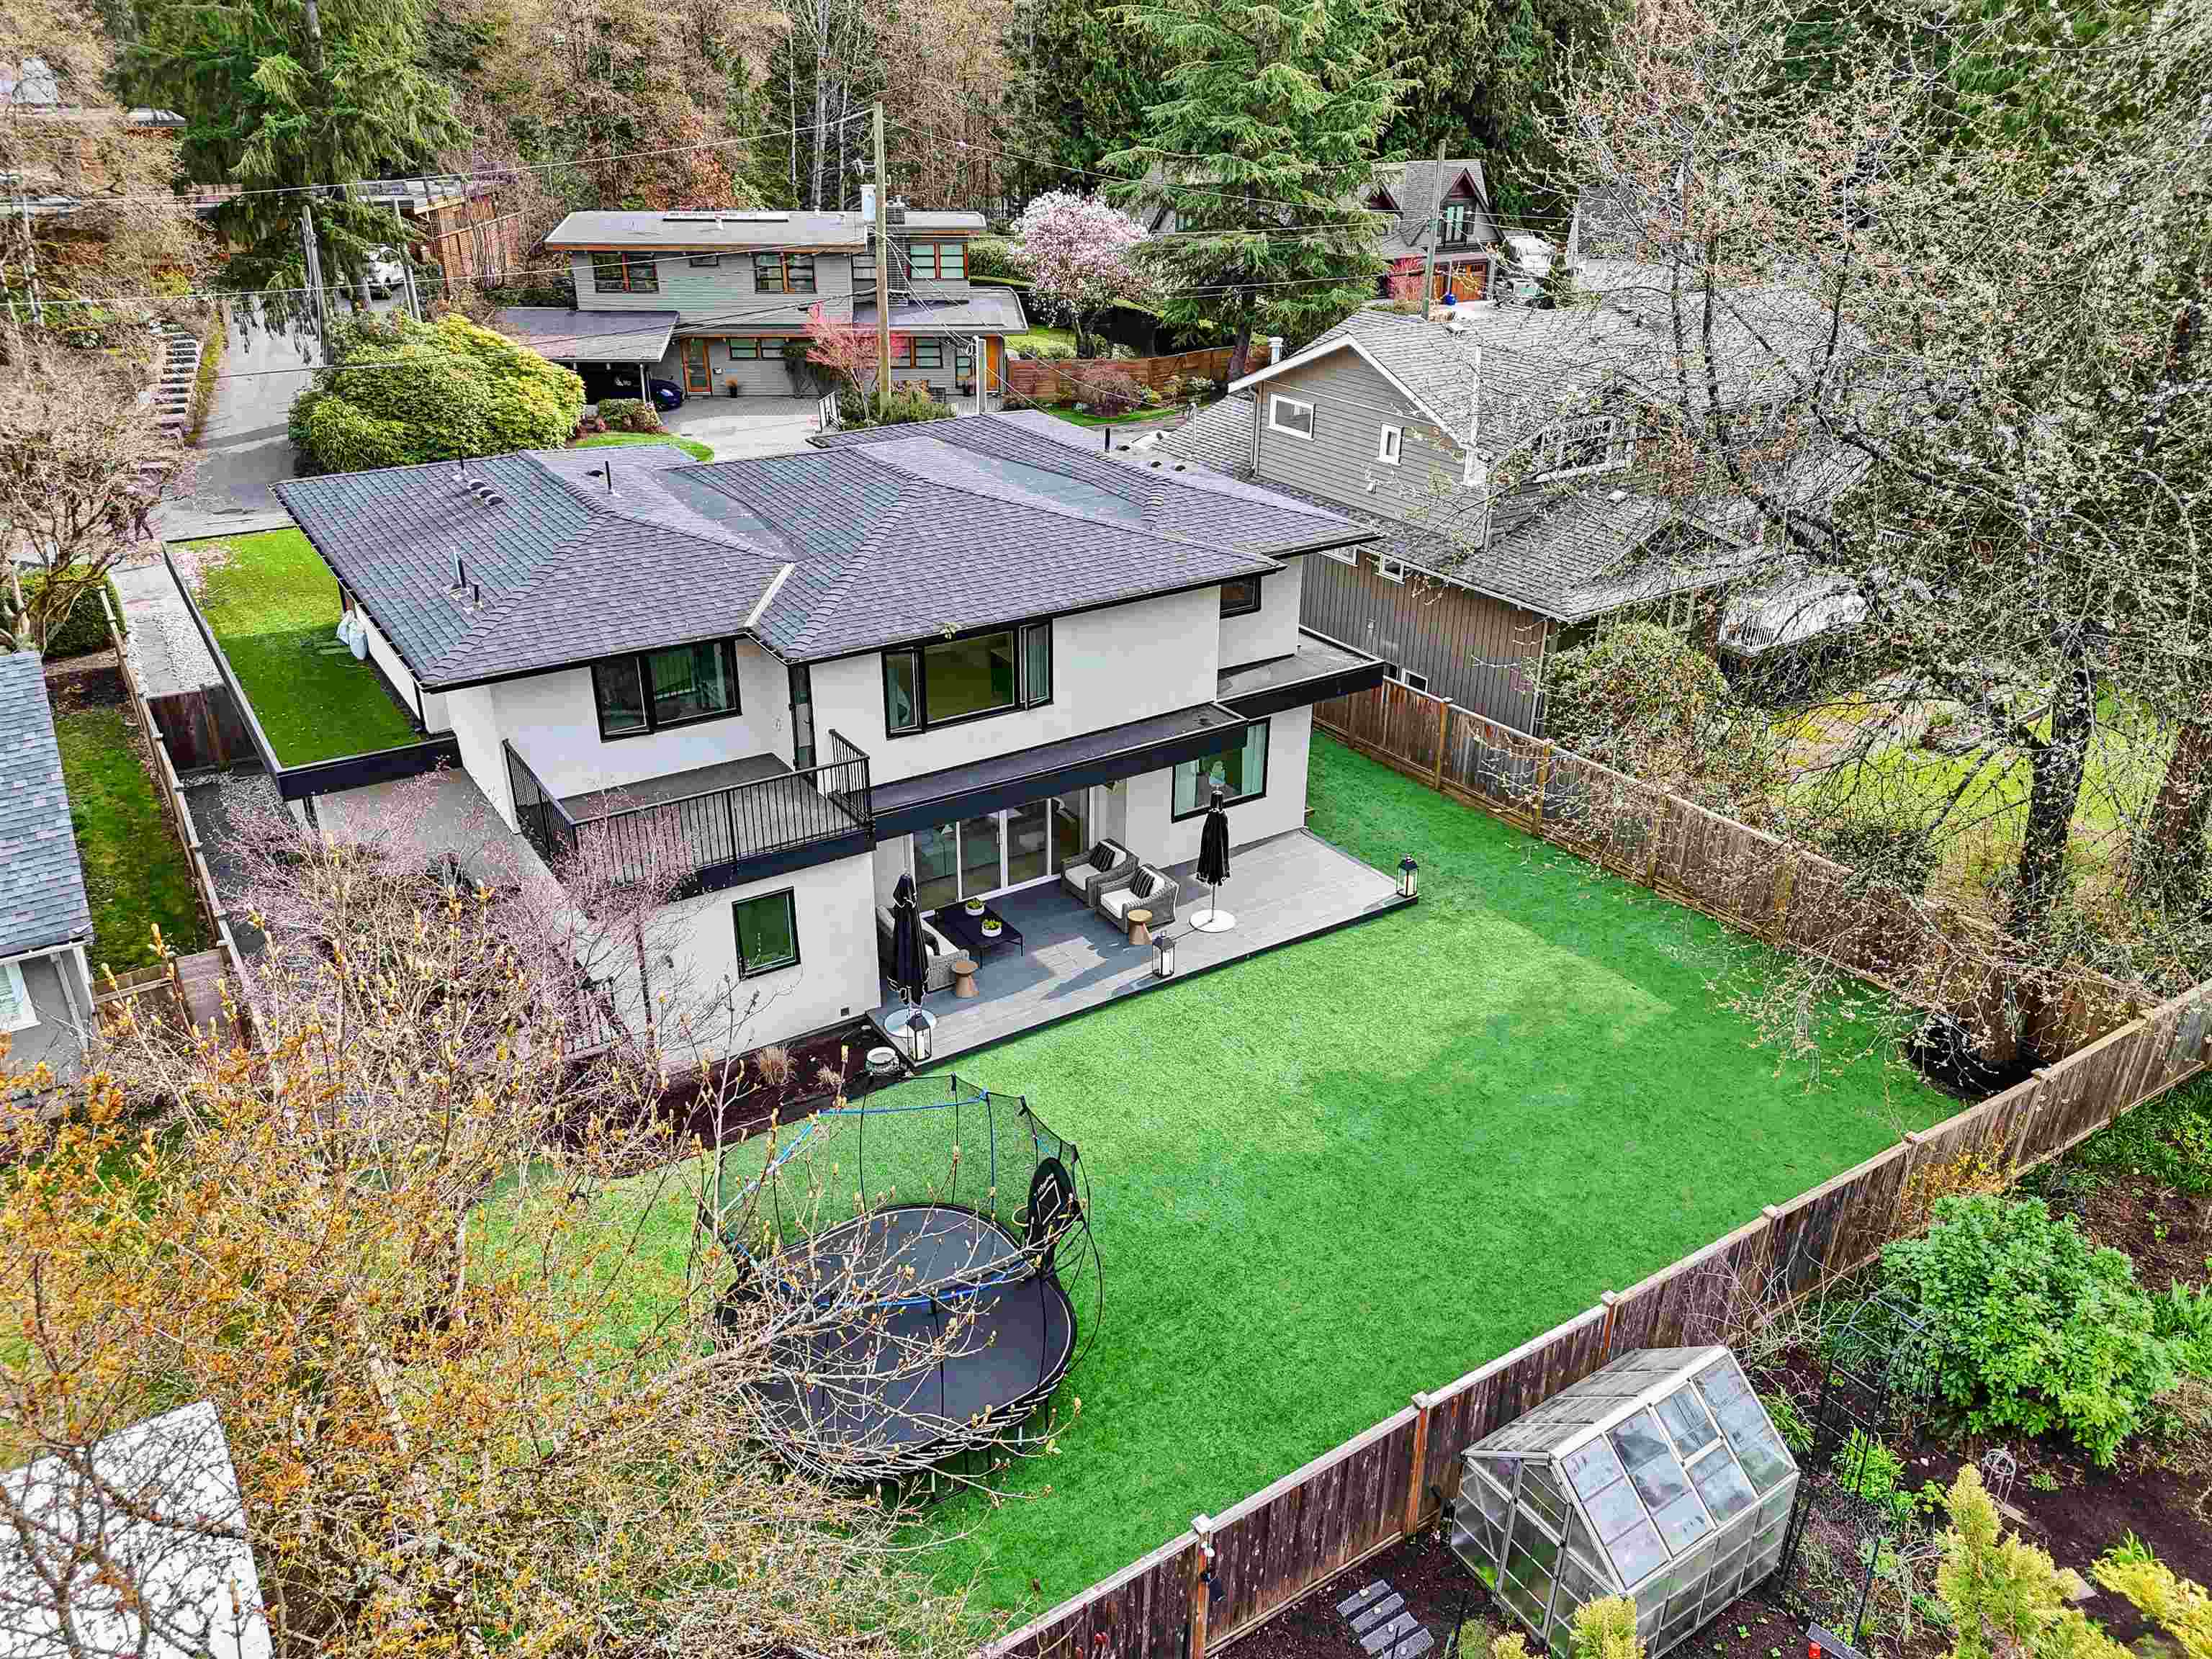 Listing image of 2795 COLWOOD DRIVE